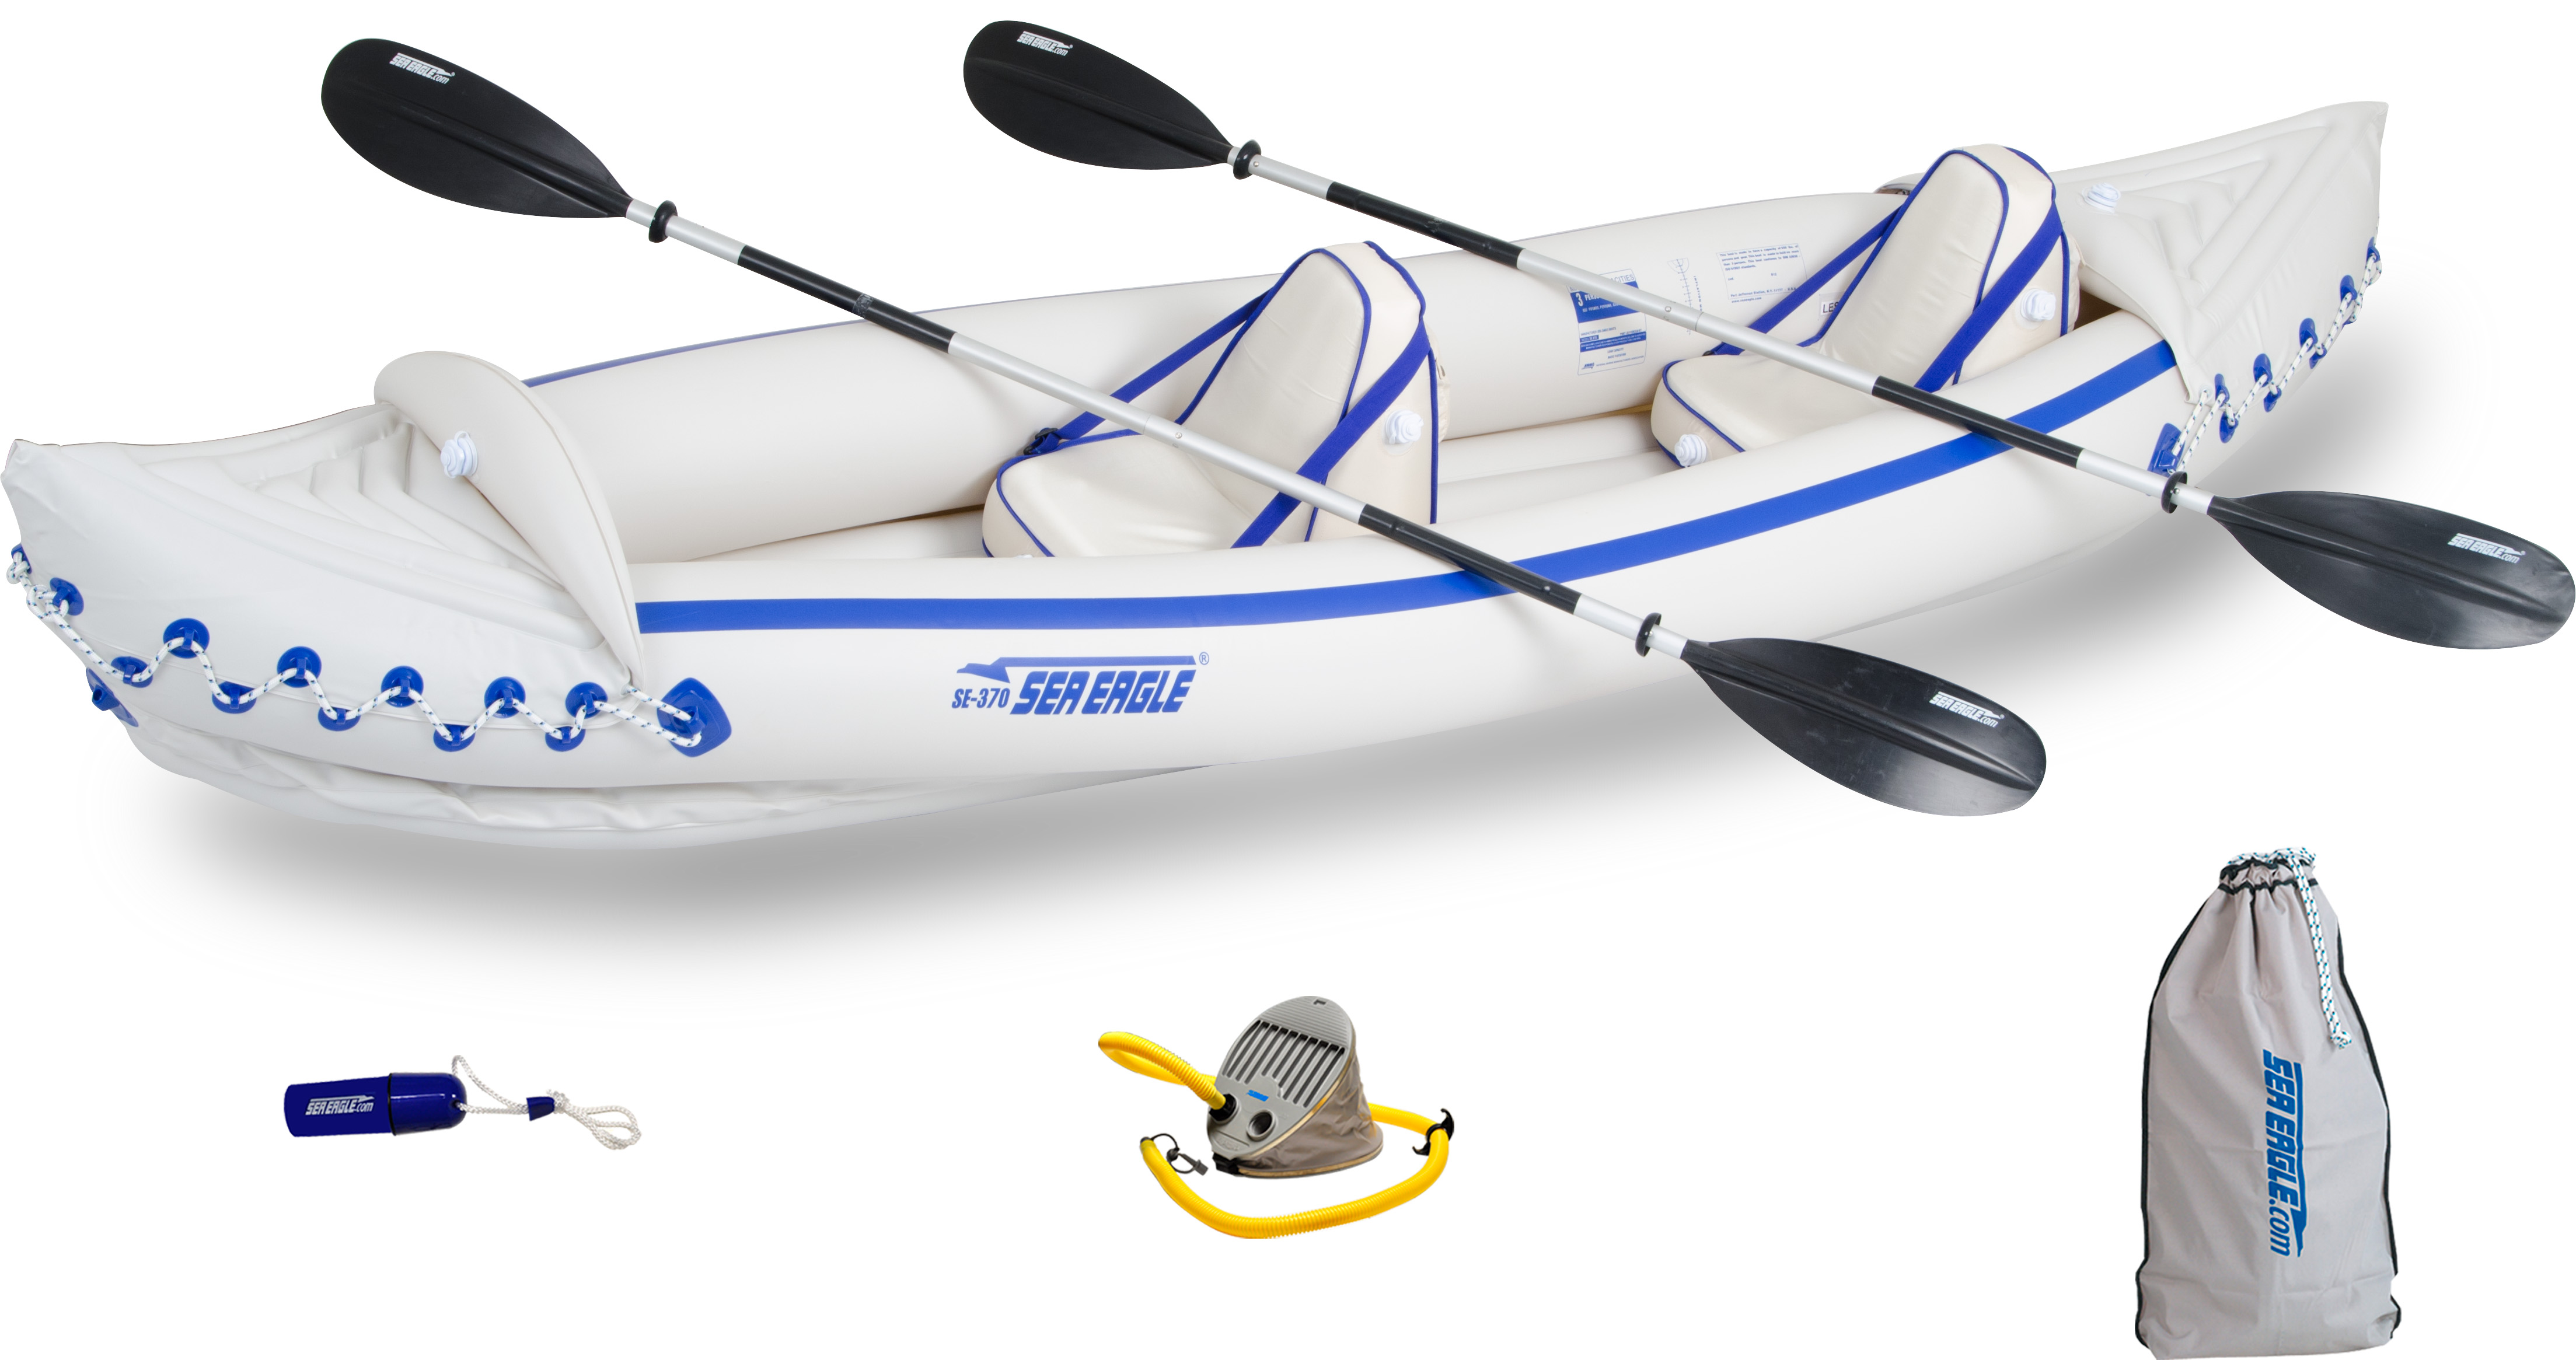 Sea Eagle SE370 Inflatable Sports Kayak -1-3 Person-Portable Stowable & Lightweight-with Seat(s), Paddle(s), Pump and Bag – Pro Package - image 1 of 10